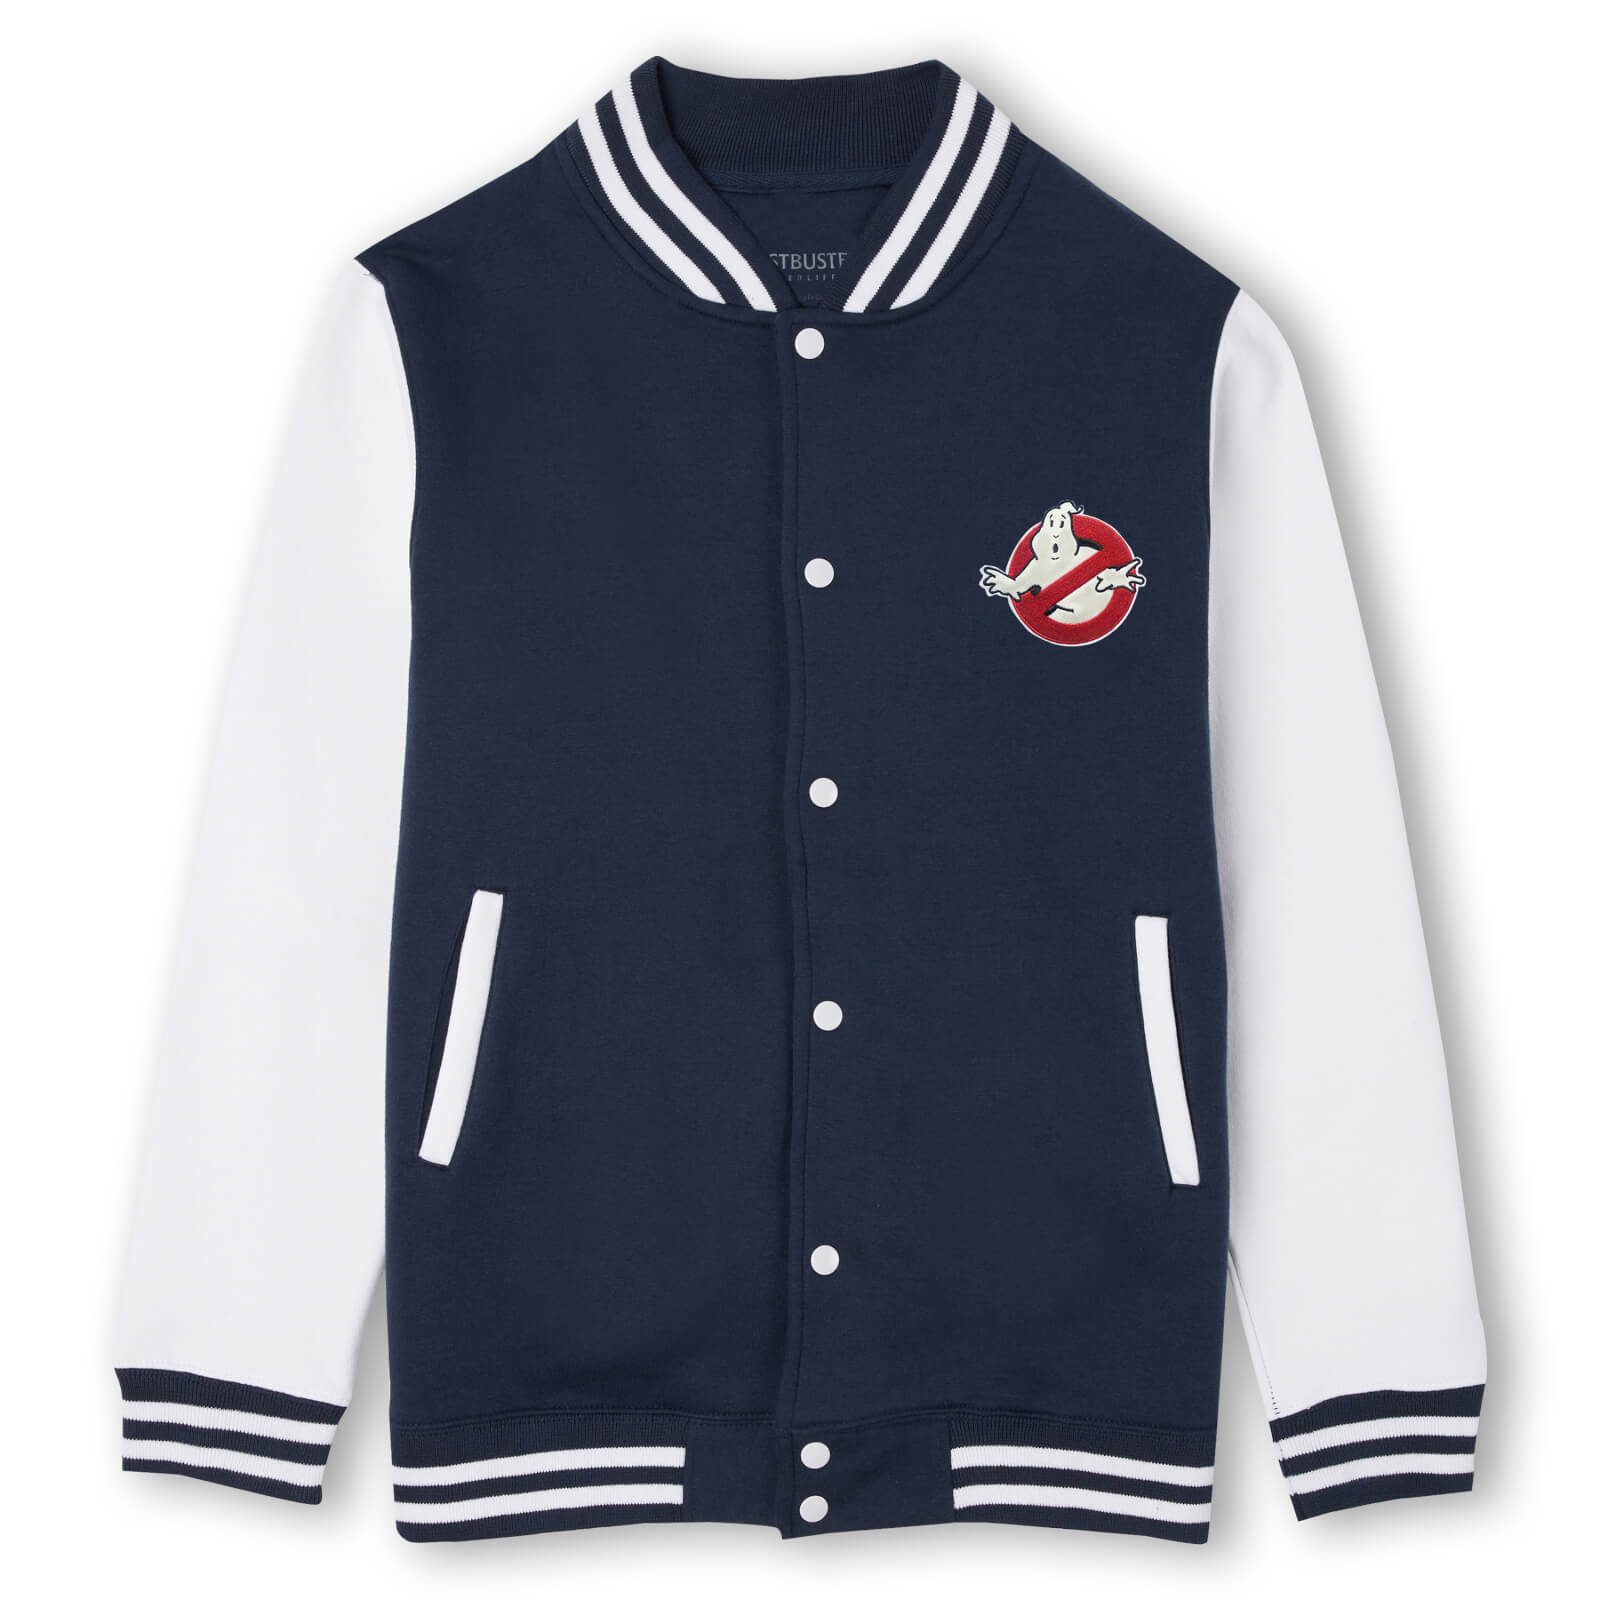 Ghostbusters Bustin' Equipment Embroidered Varsity Jacket - Navy / White - L - Navy / White